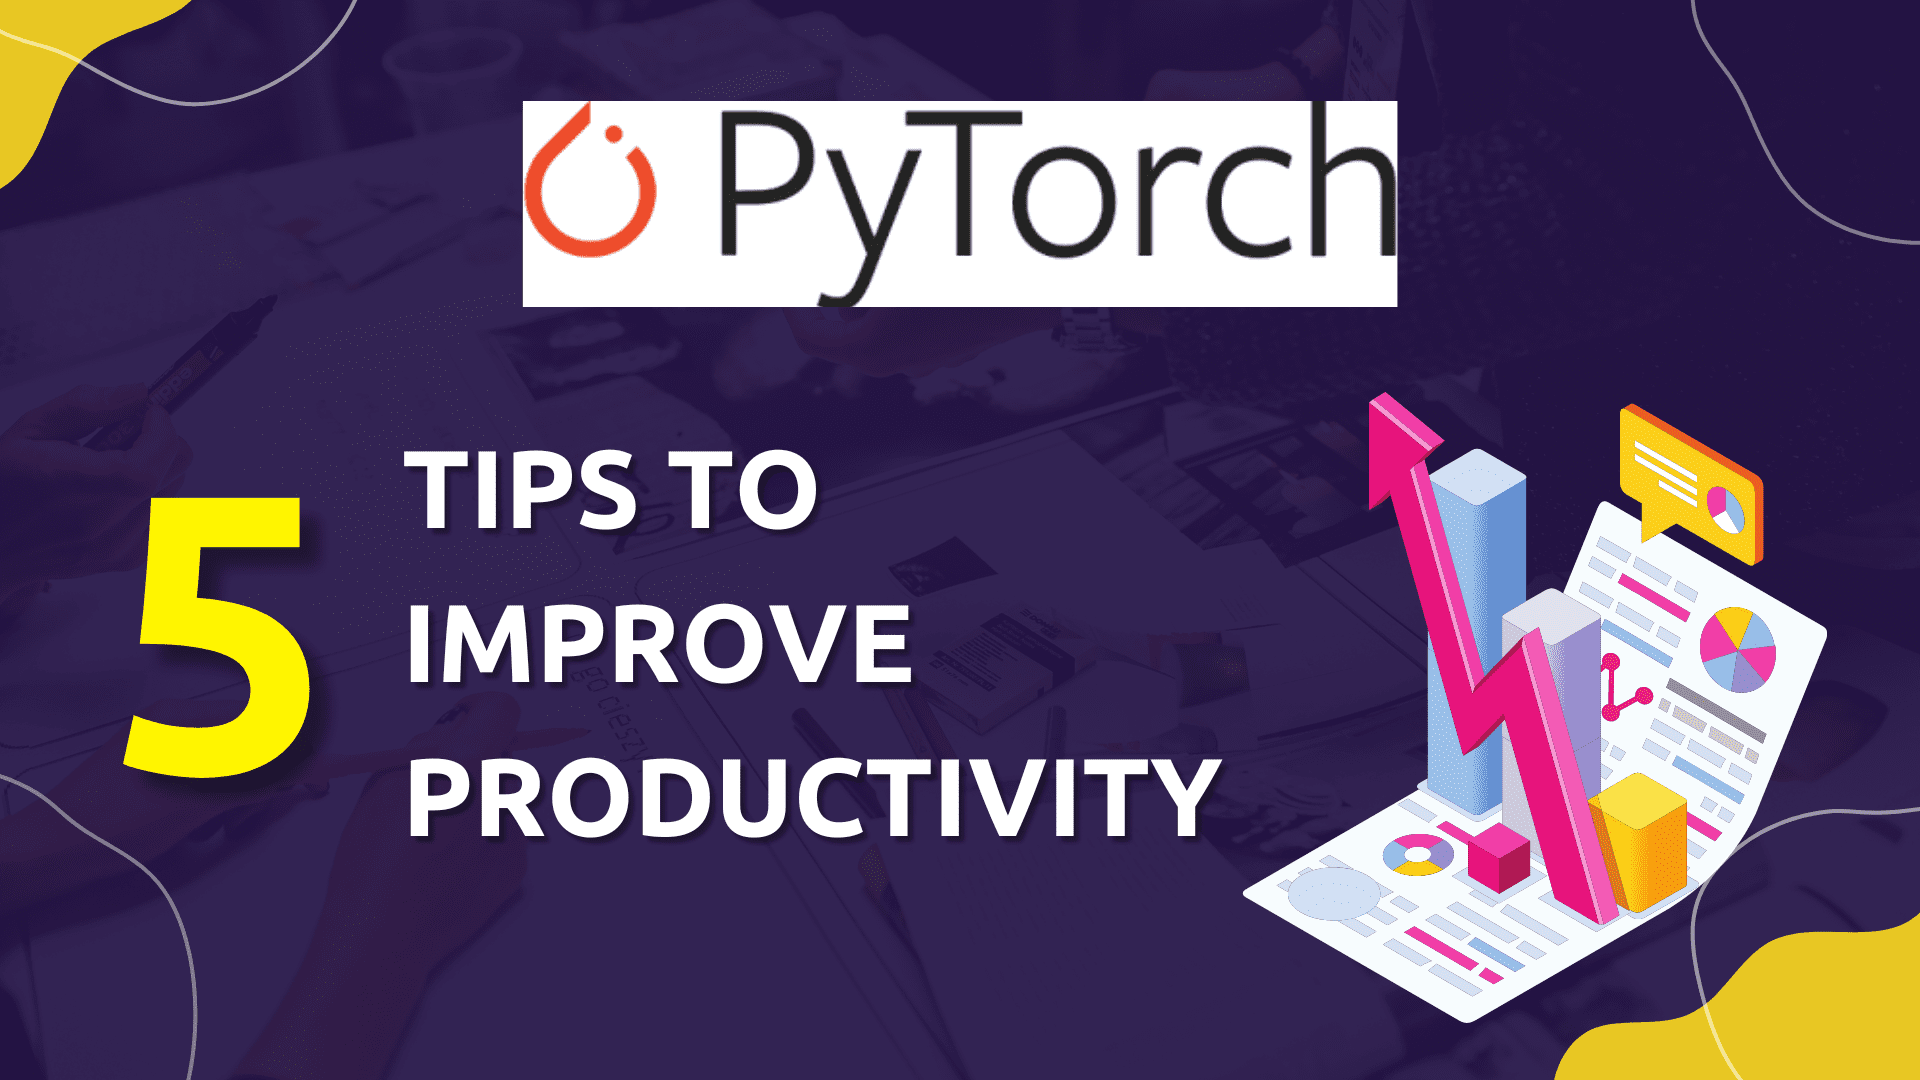 PyTorch Tips to Boost Your Productivity